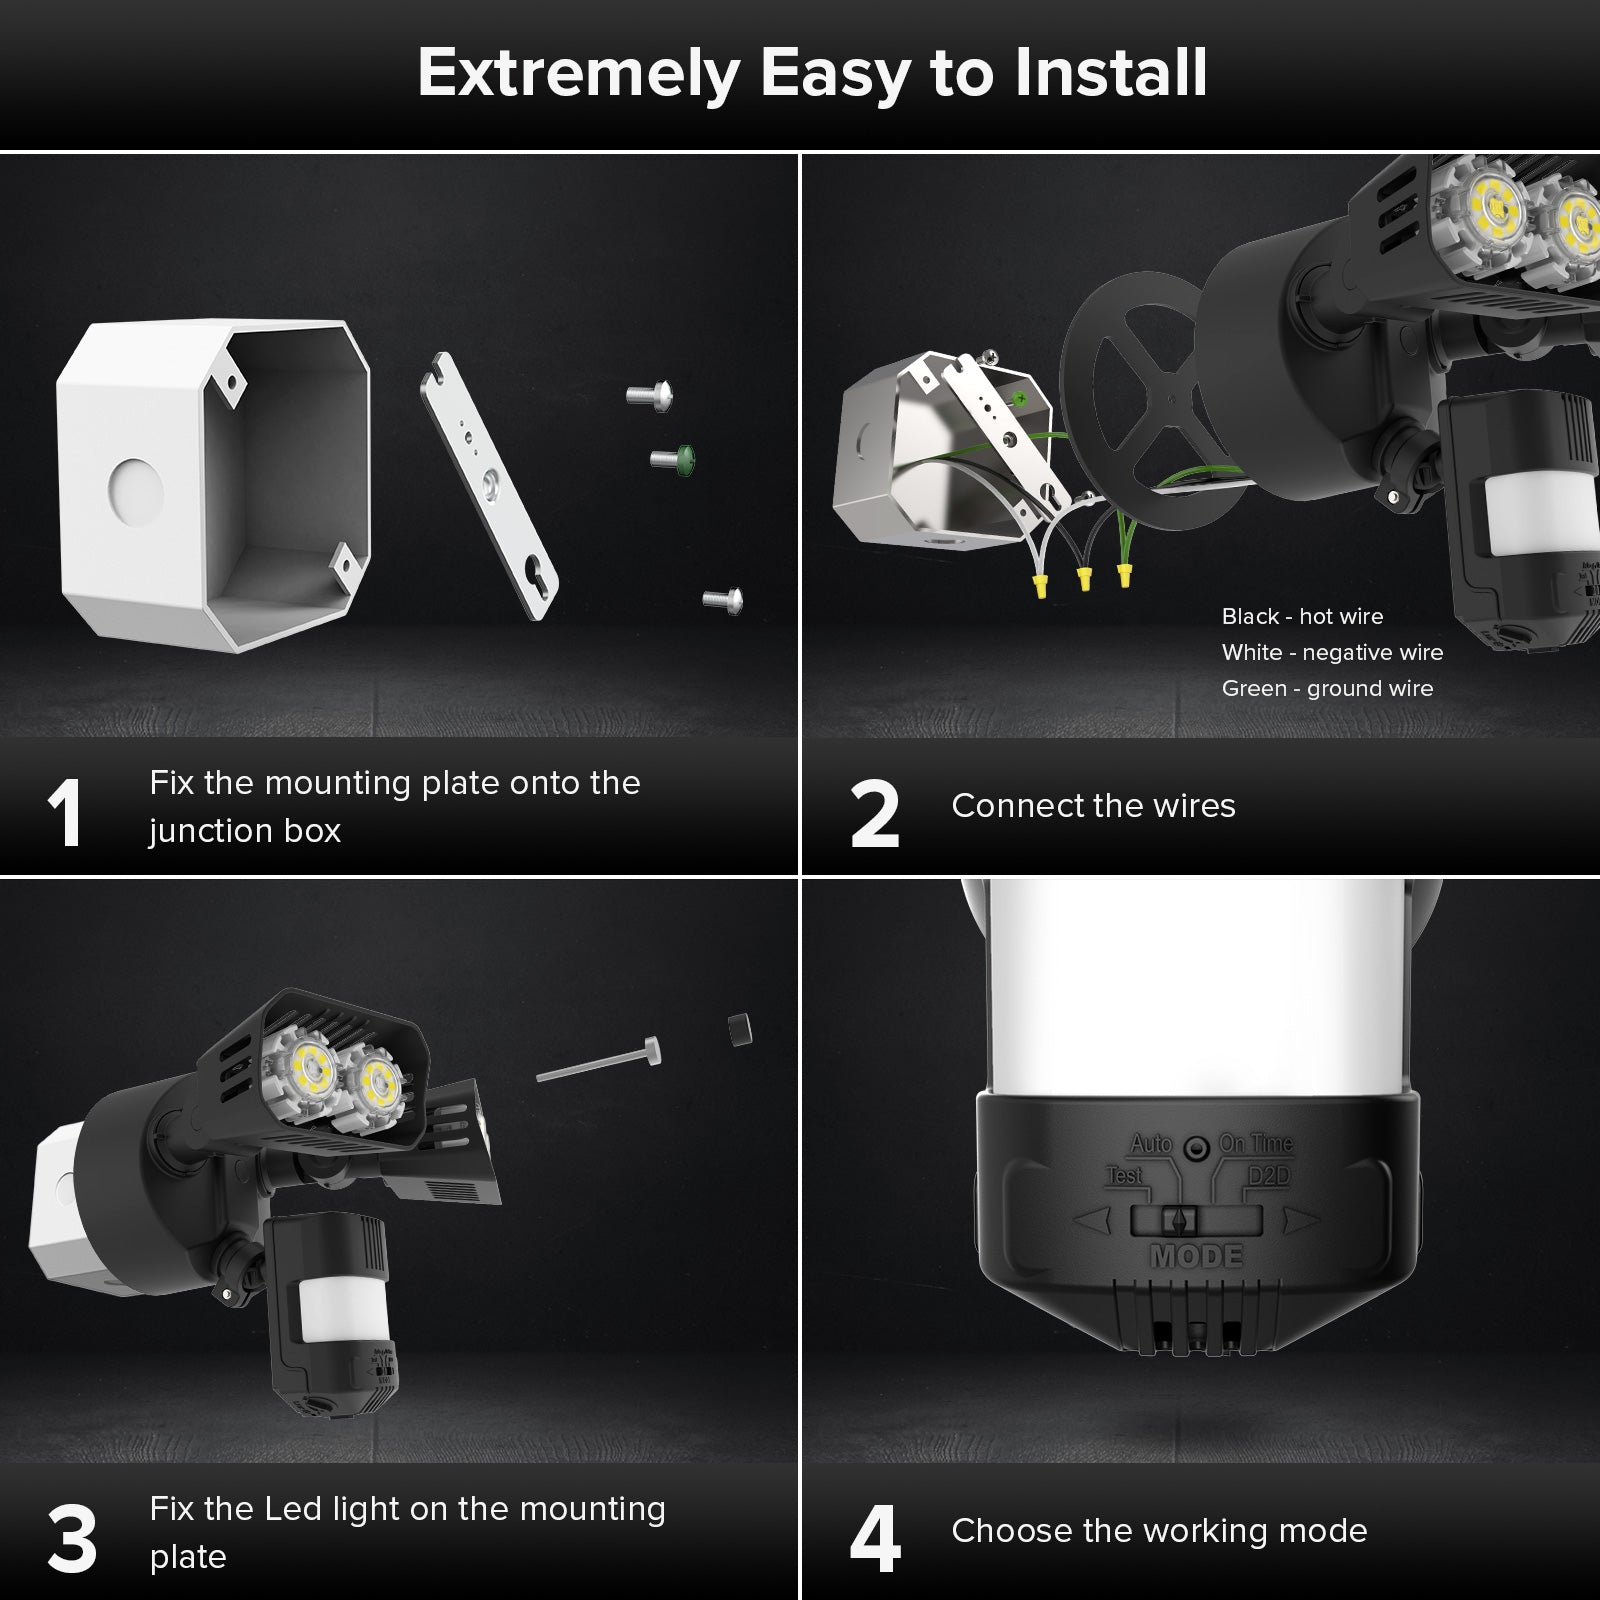 18W LED Security Light (Dusk to Dawn & Motion Sensor) is extremely easy to install